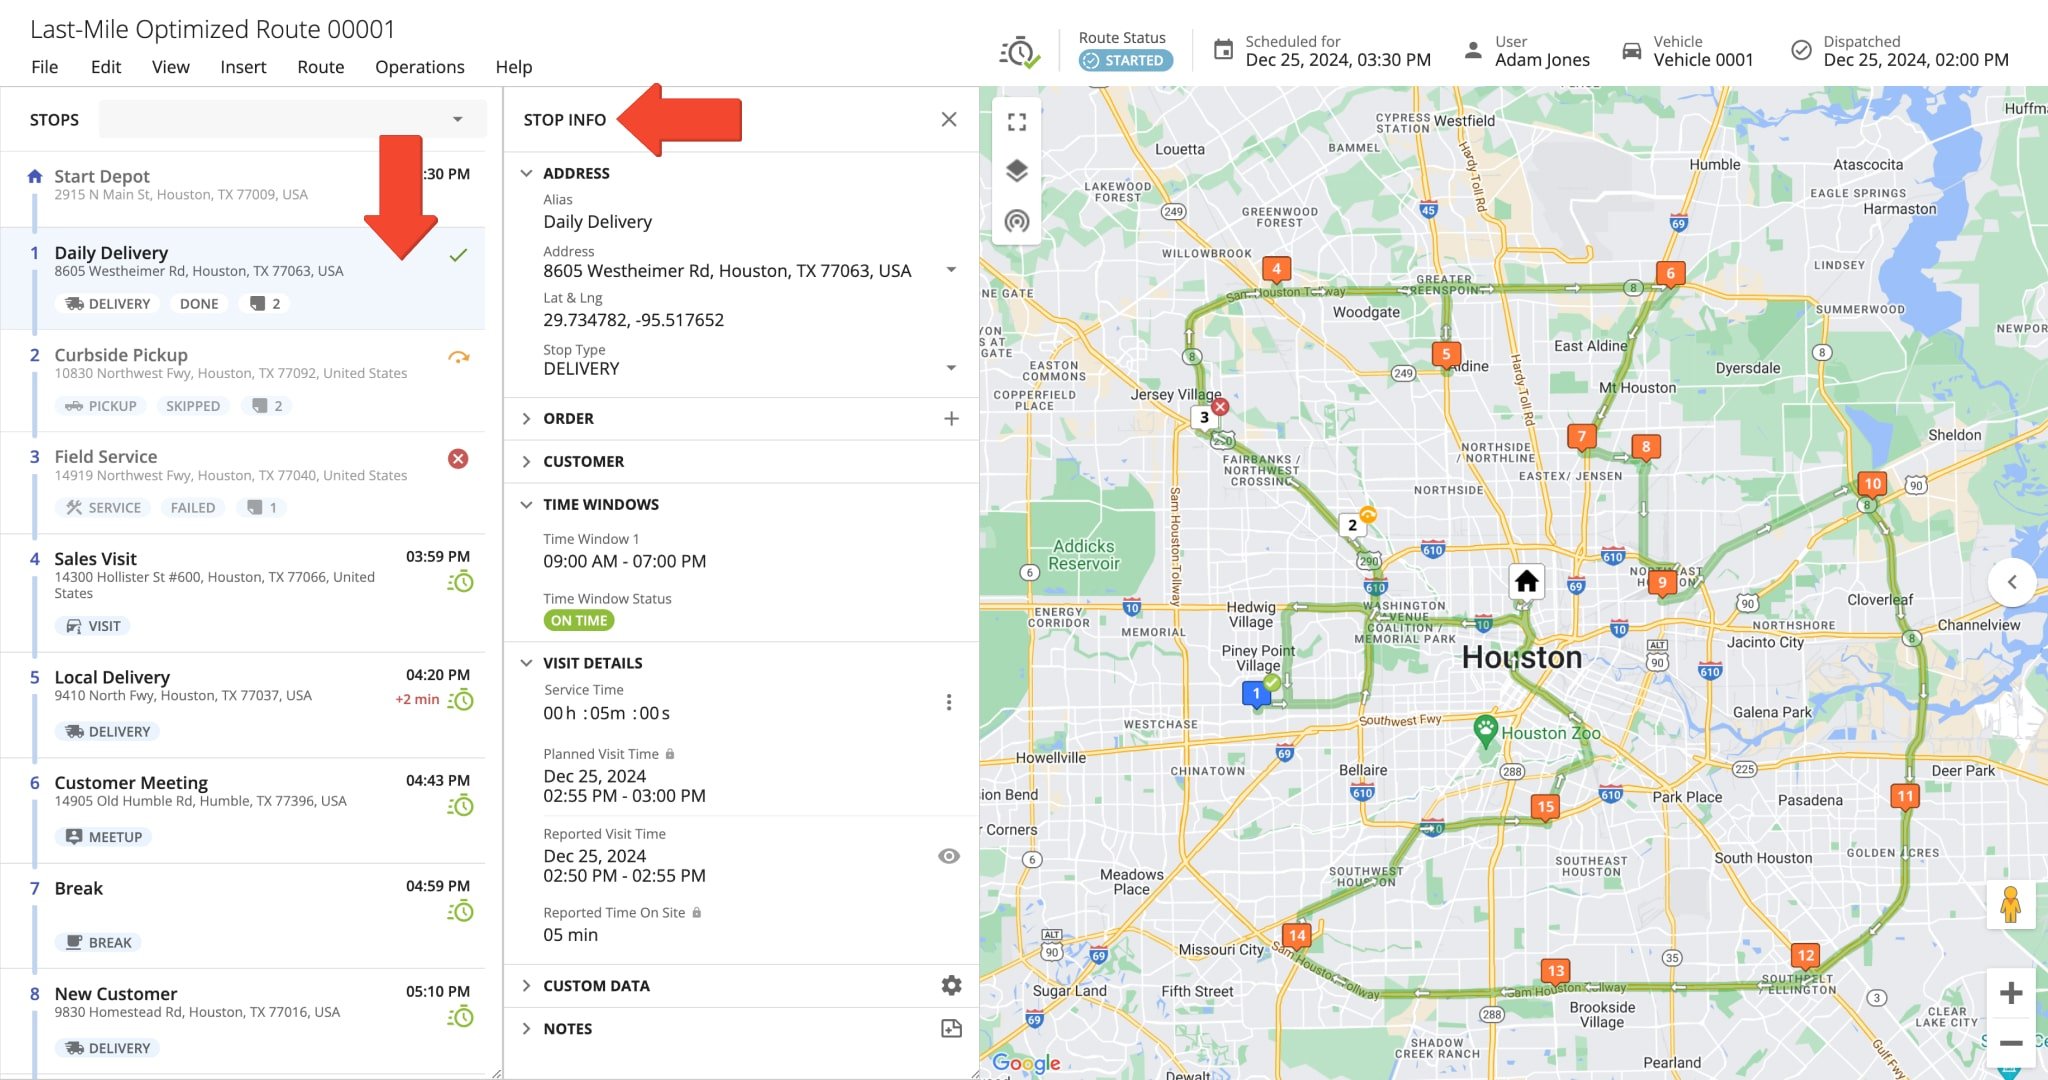 Opening and managing route stops, checking stop ETAs, editing customer details, order info, Custom Data, and adding notes in Route4Me's Route Editor.